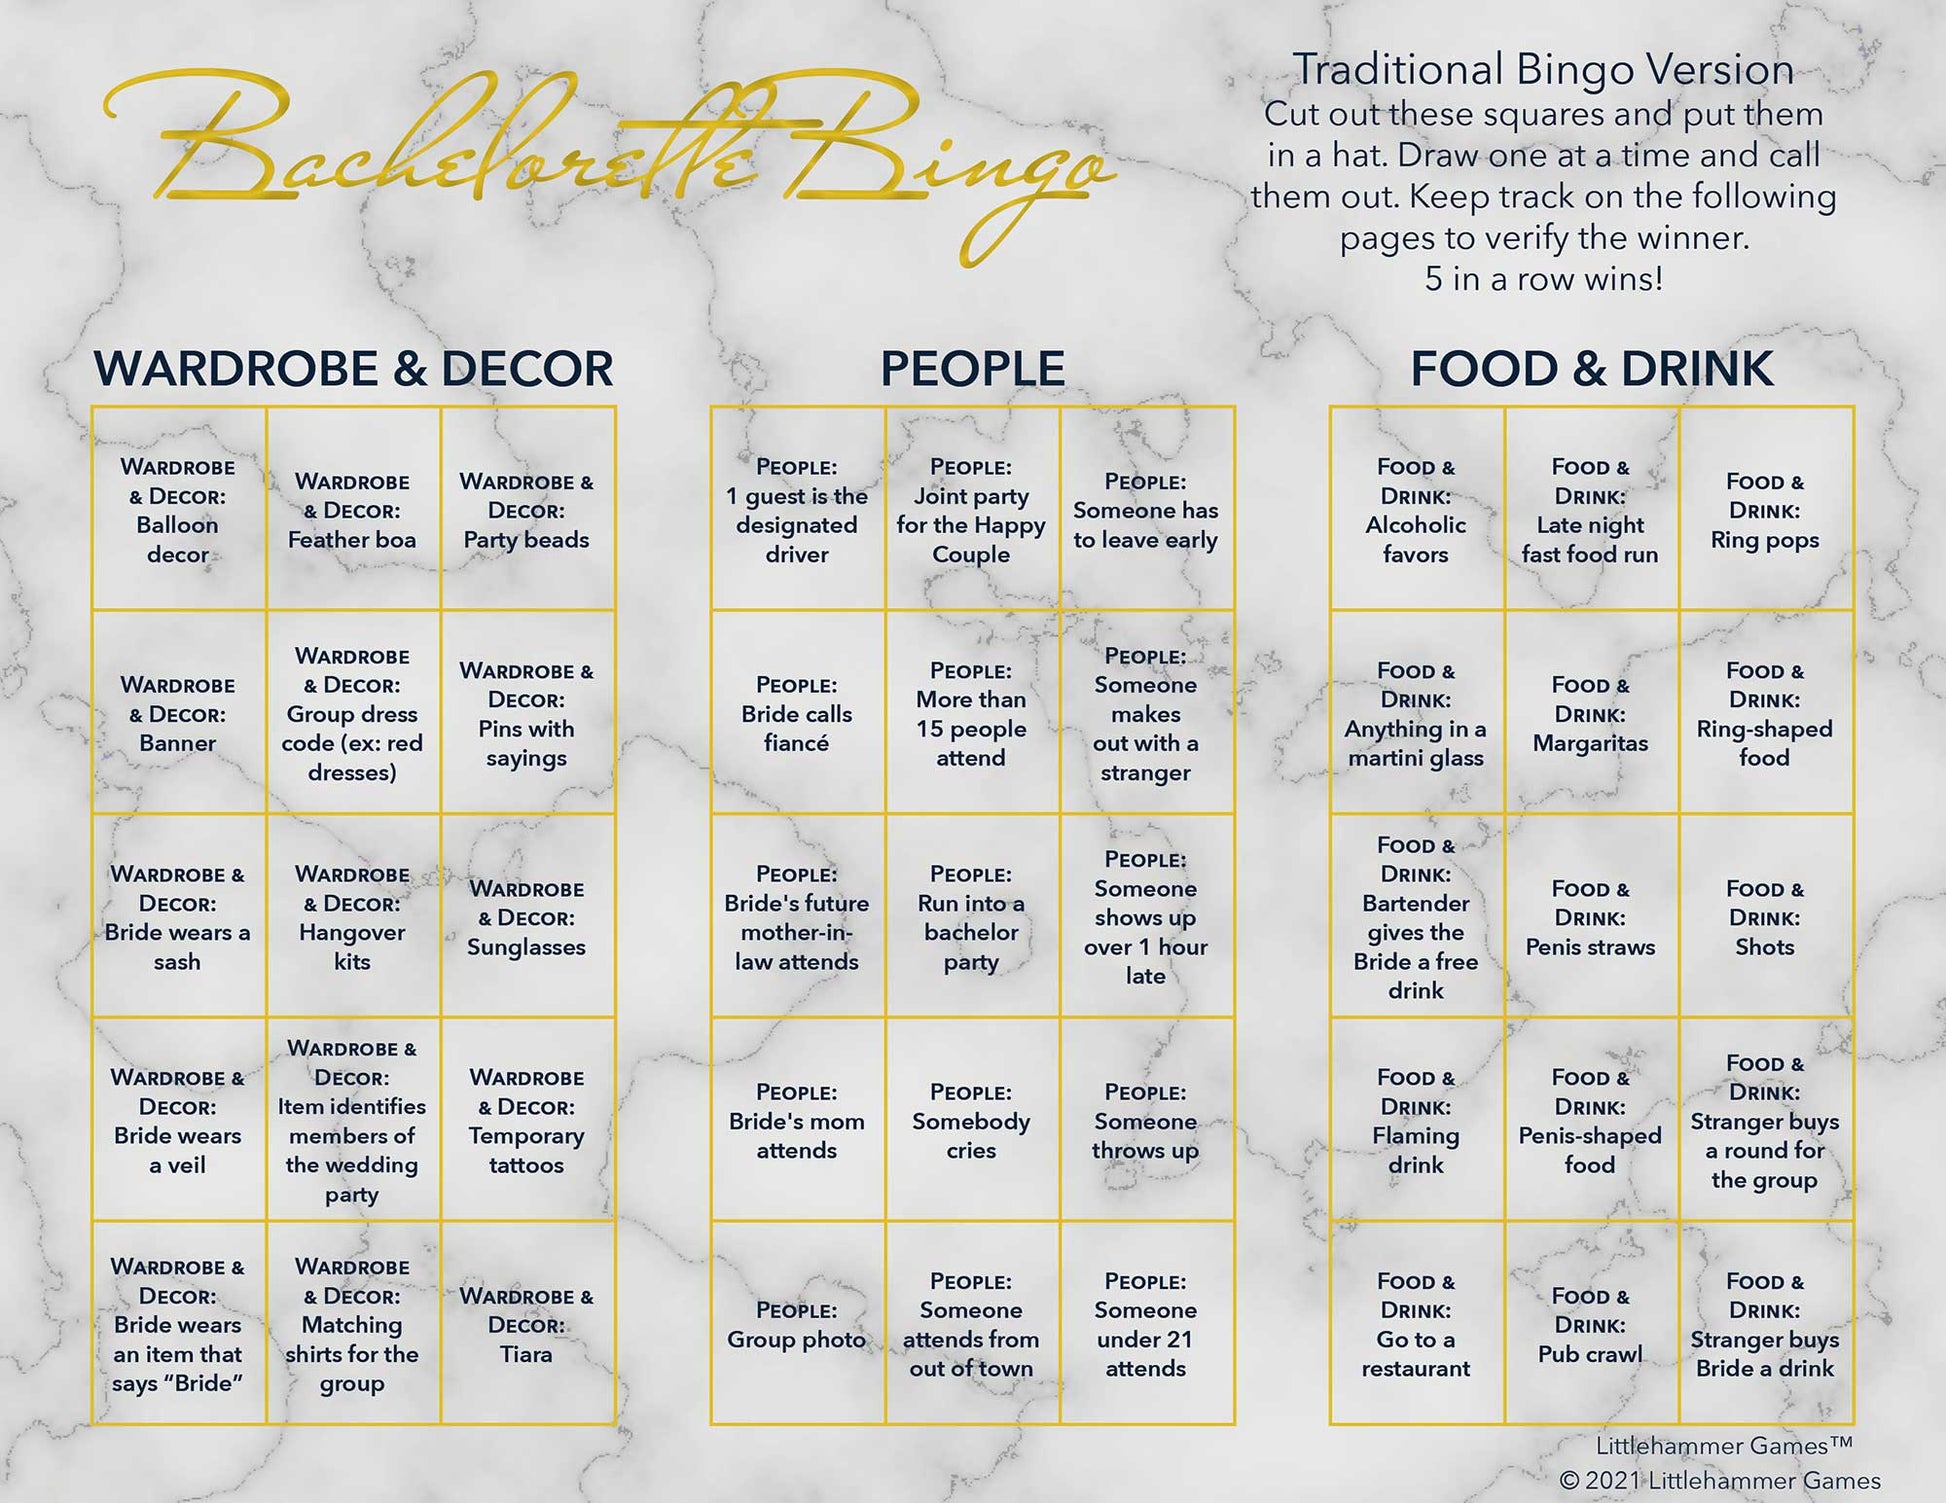 Bachelorette Bingo calling card with gold text on a marble background